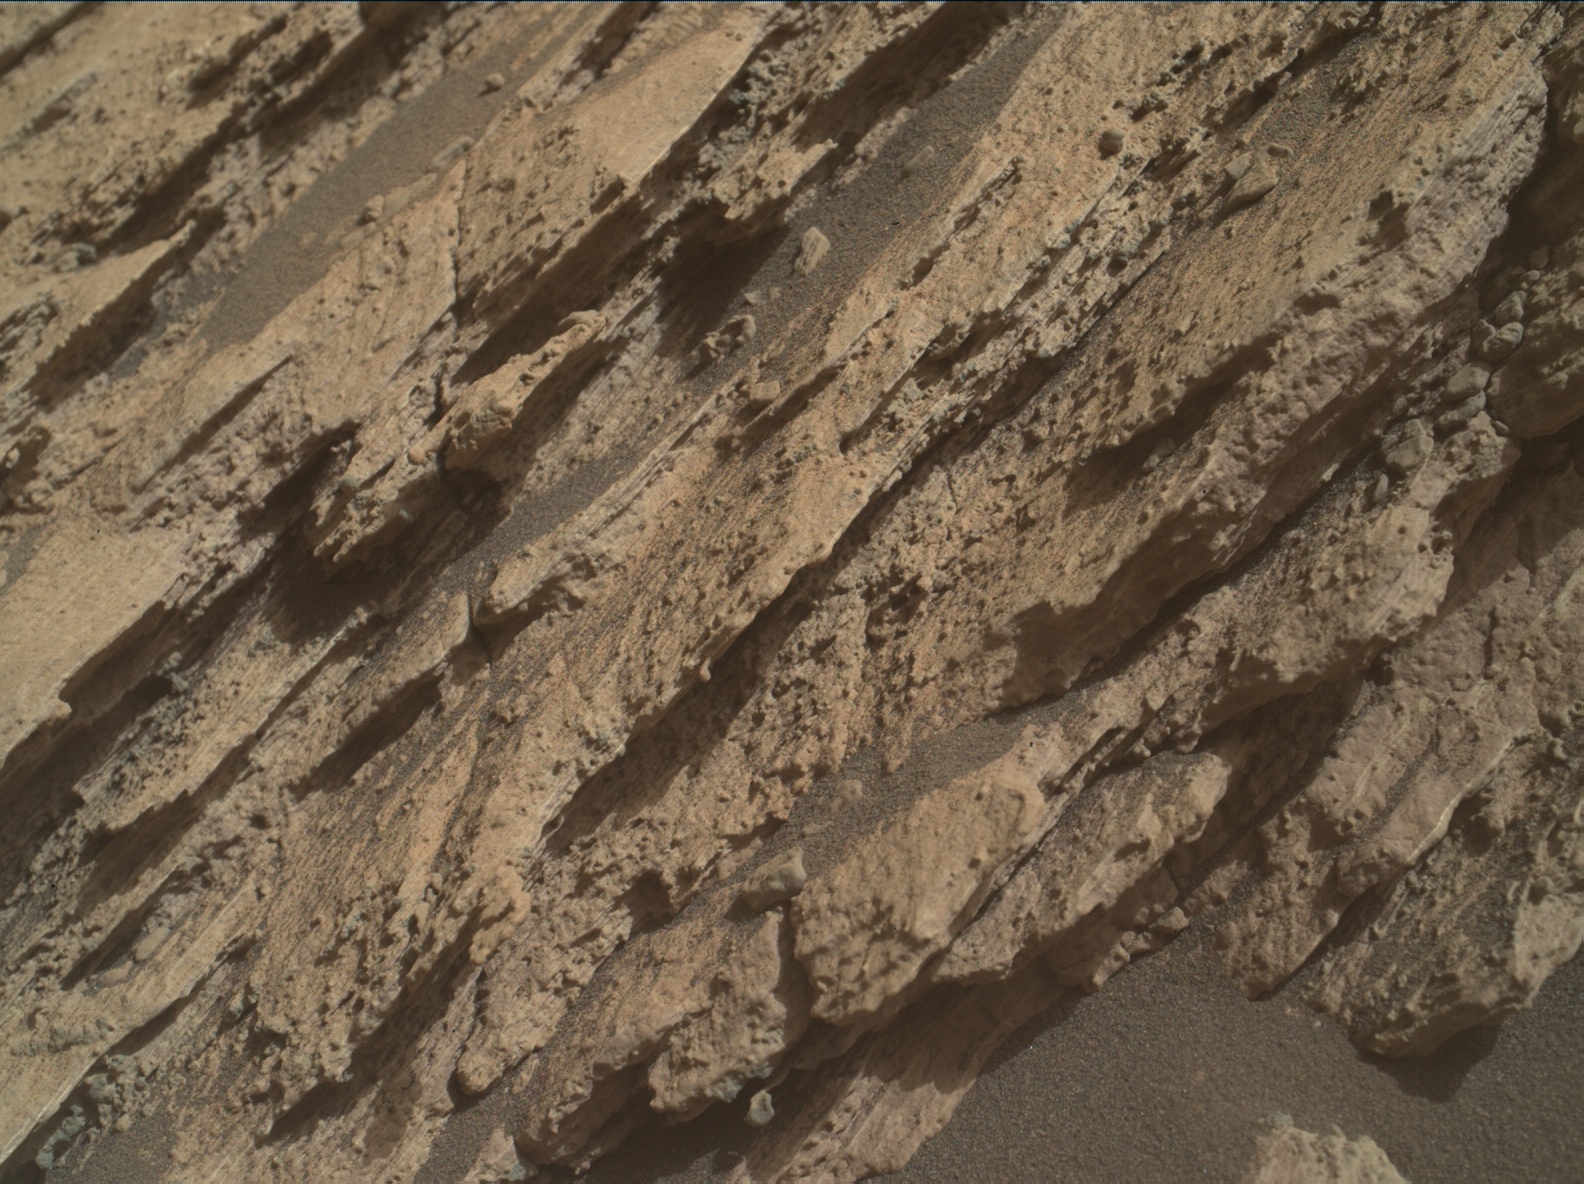 Nasa's Mars rover Curiosity acquired this image using its Mars Hand Lens Imager (MAHLI) on Sol 2585